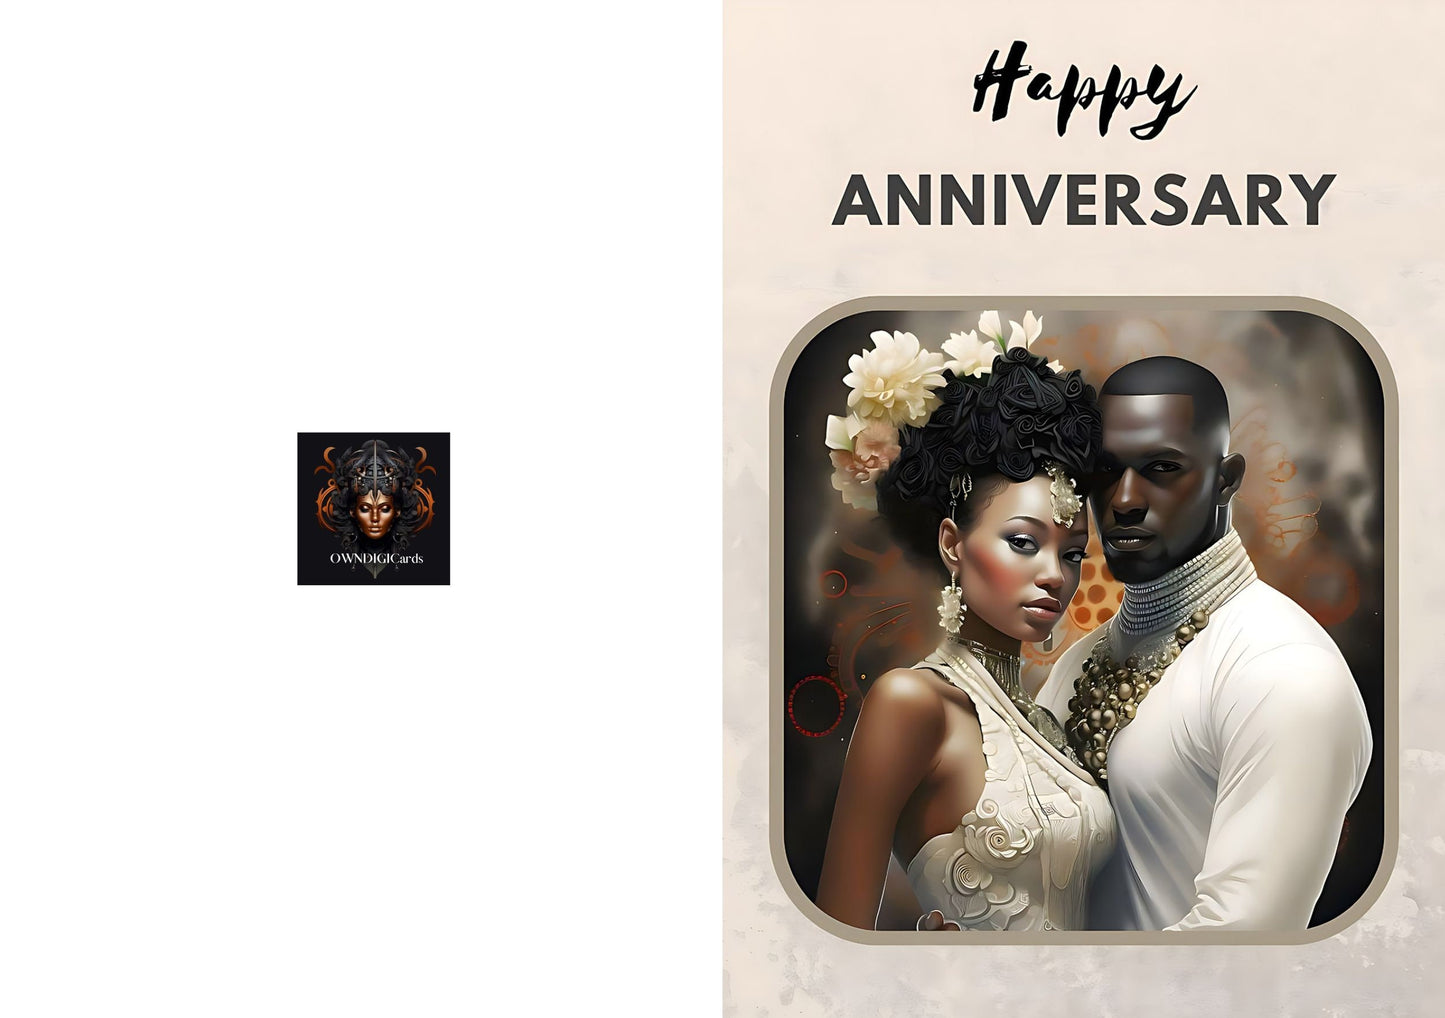 Happy Anniversary - Celebrate with Elegance: Black Art Greeting Cards for Every Occasion - Digital Instant Download